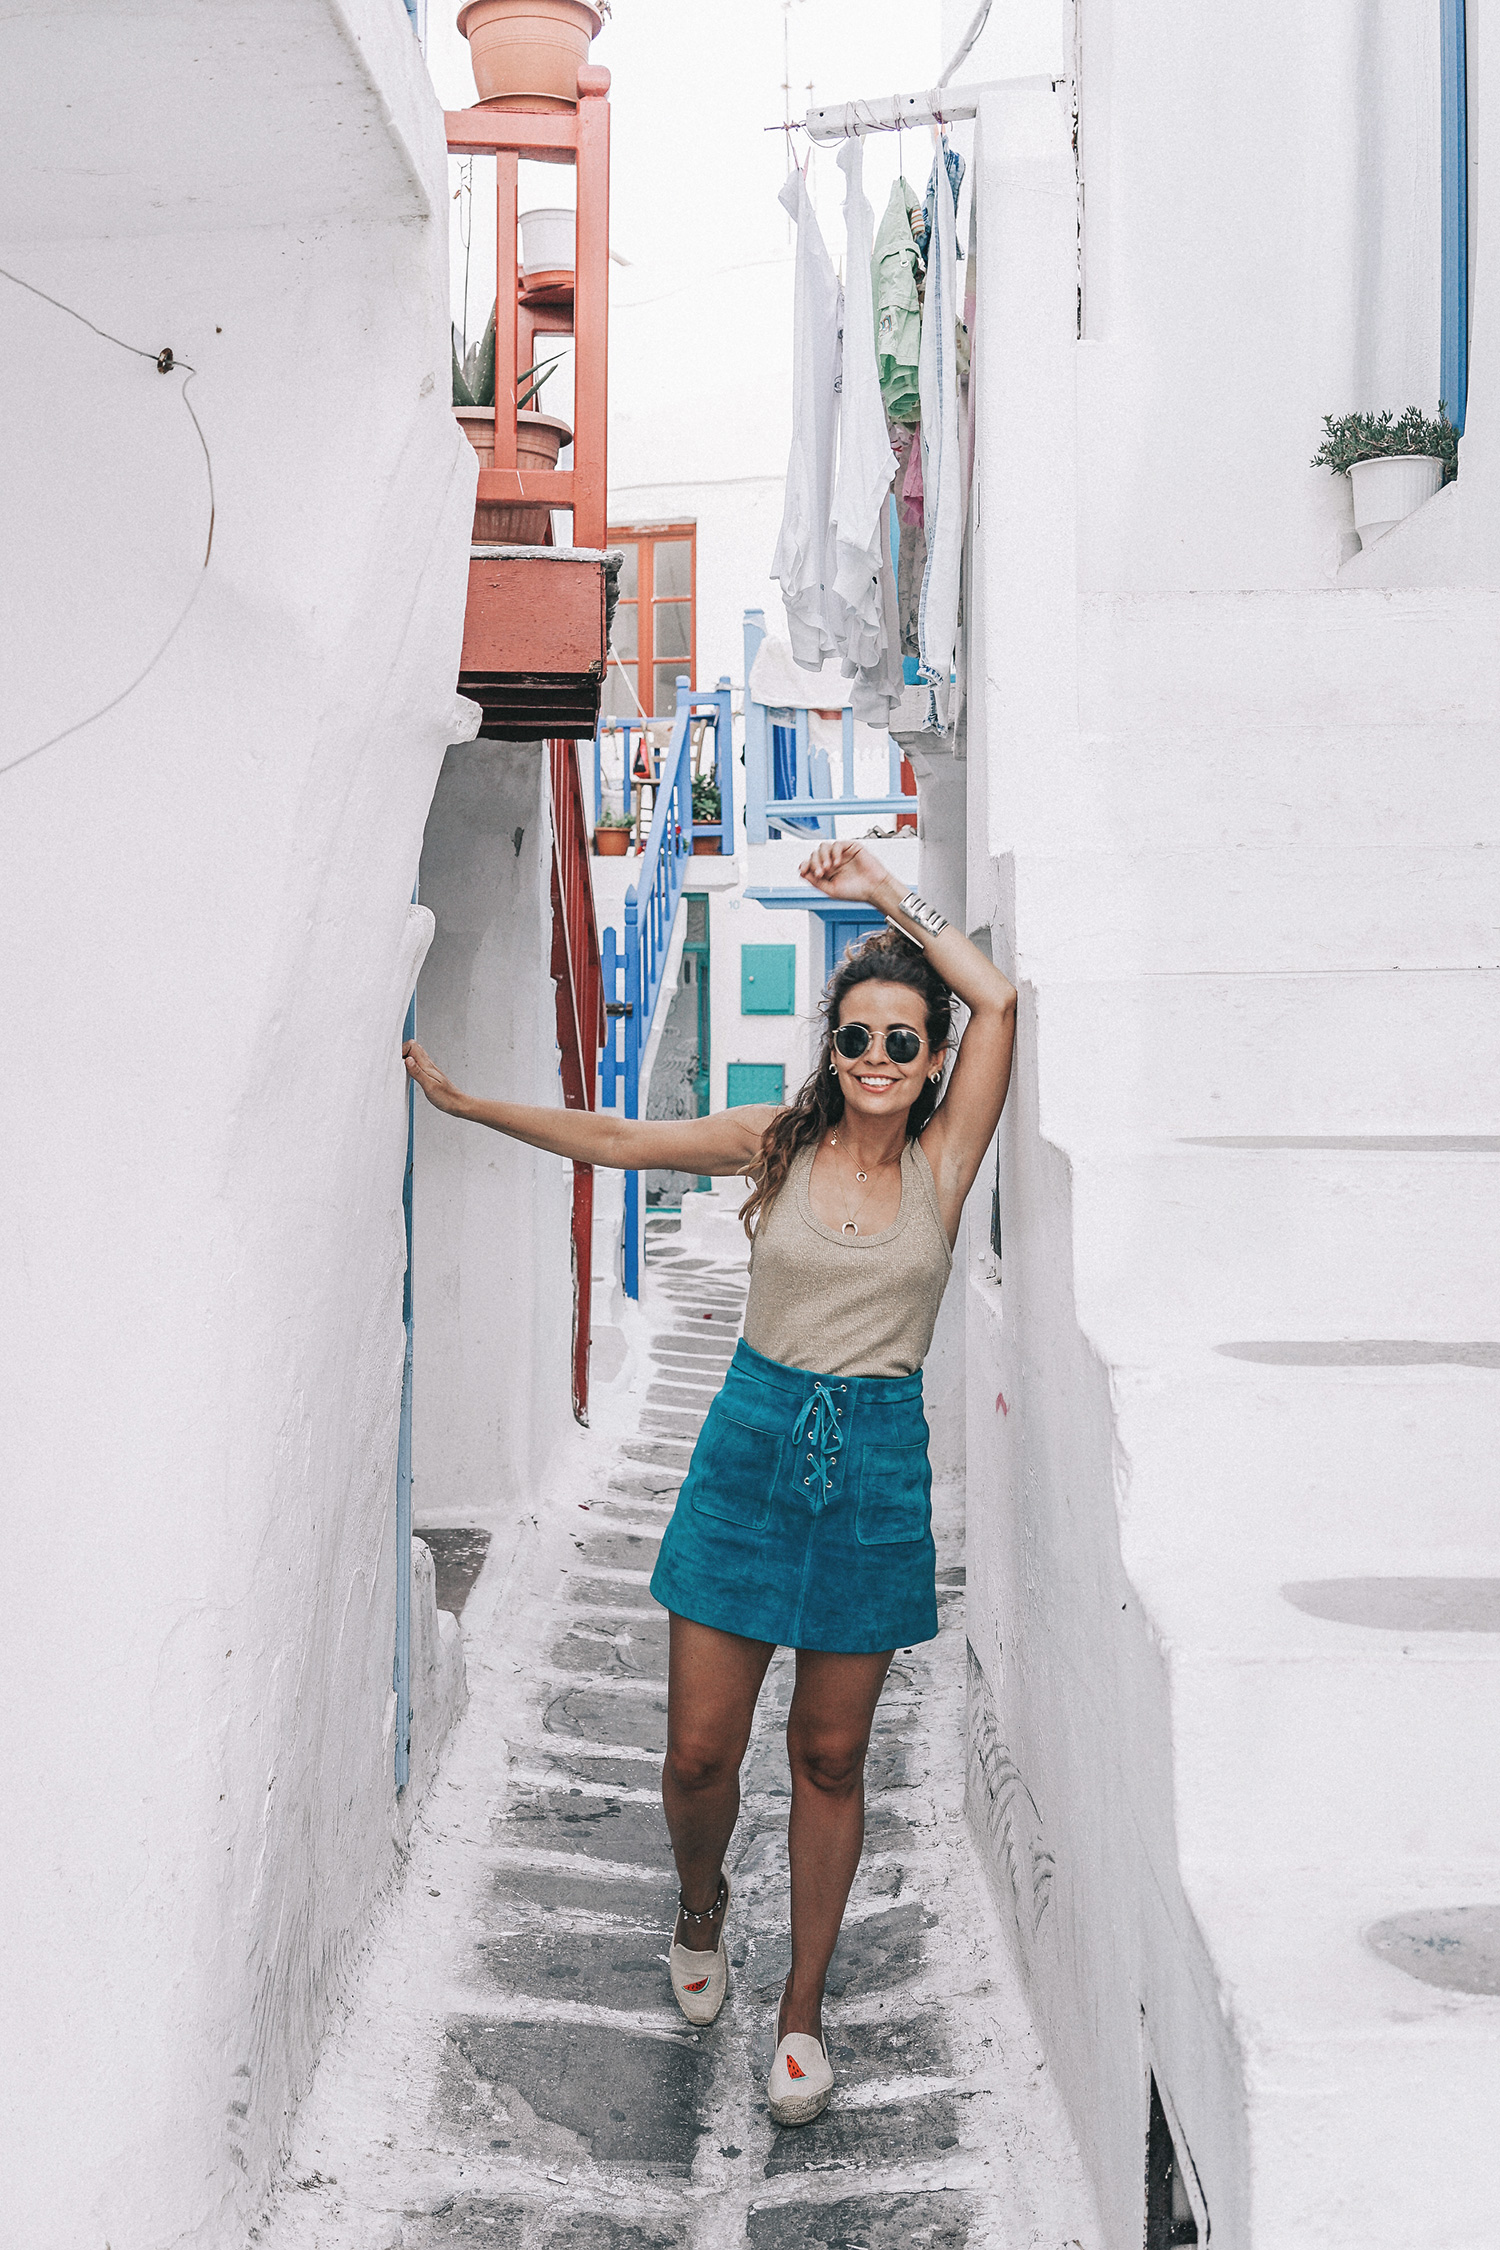 Gold_Top-Metallic_Trend-Suede_Skirt-Turquoise_Skirt-Soludos_Espadrilles-Soludos_Escapes-Mykonos-Greece-Collage_Vintage-Street_Style-105